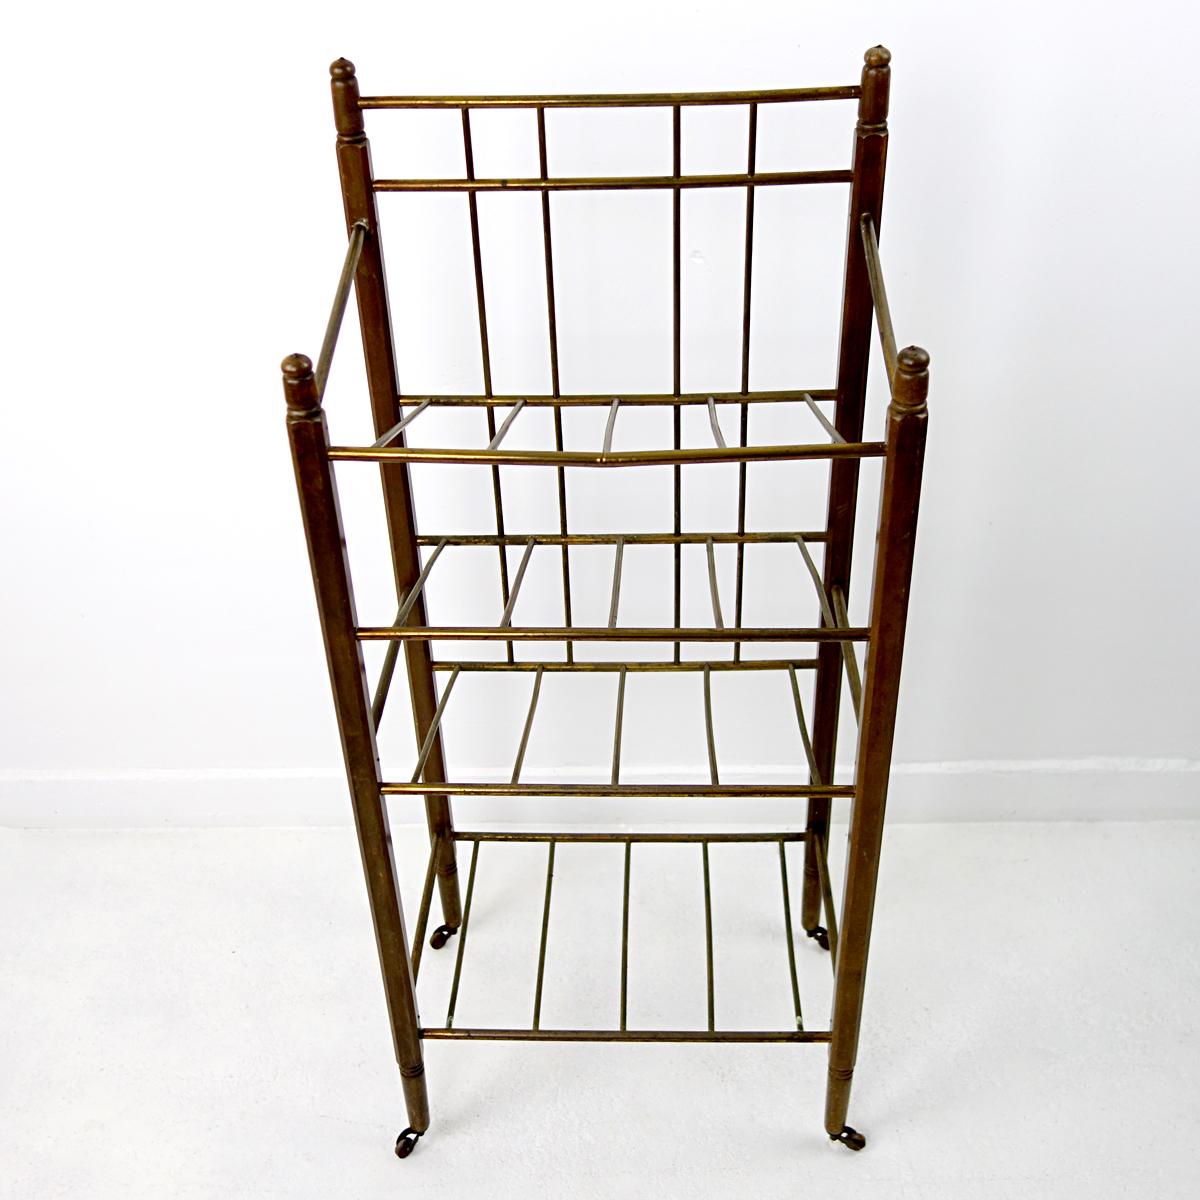 This Art Deco magazine stand was produced by Ernst Rockhausen & Söhne. 
Its frame is made of ebonized mahogany and it has brass tubes to carry your magazines. It sits on four wheels.
This elegant piece would be both a practical as a decorative